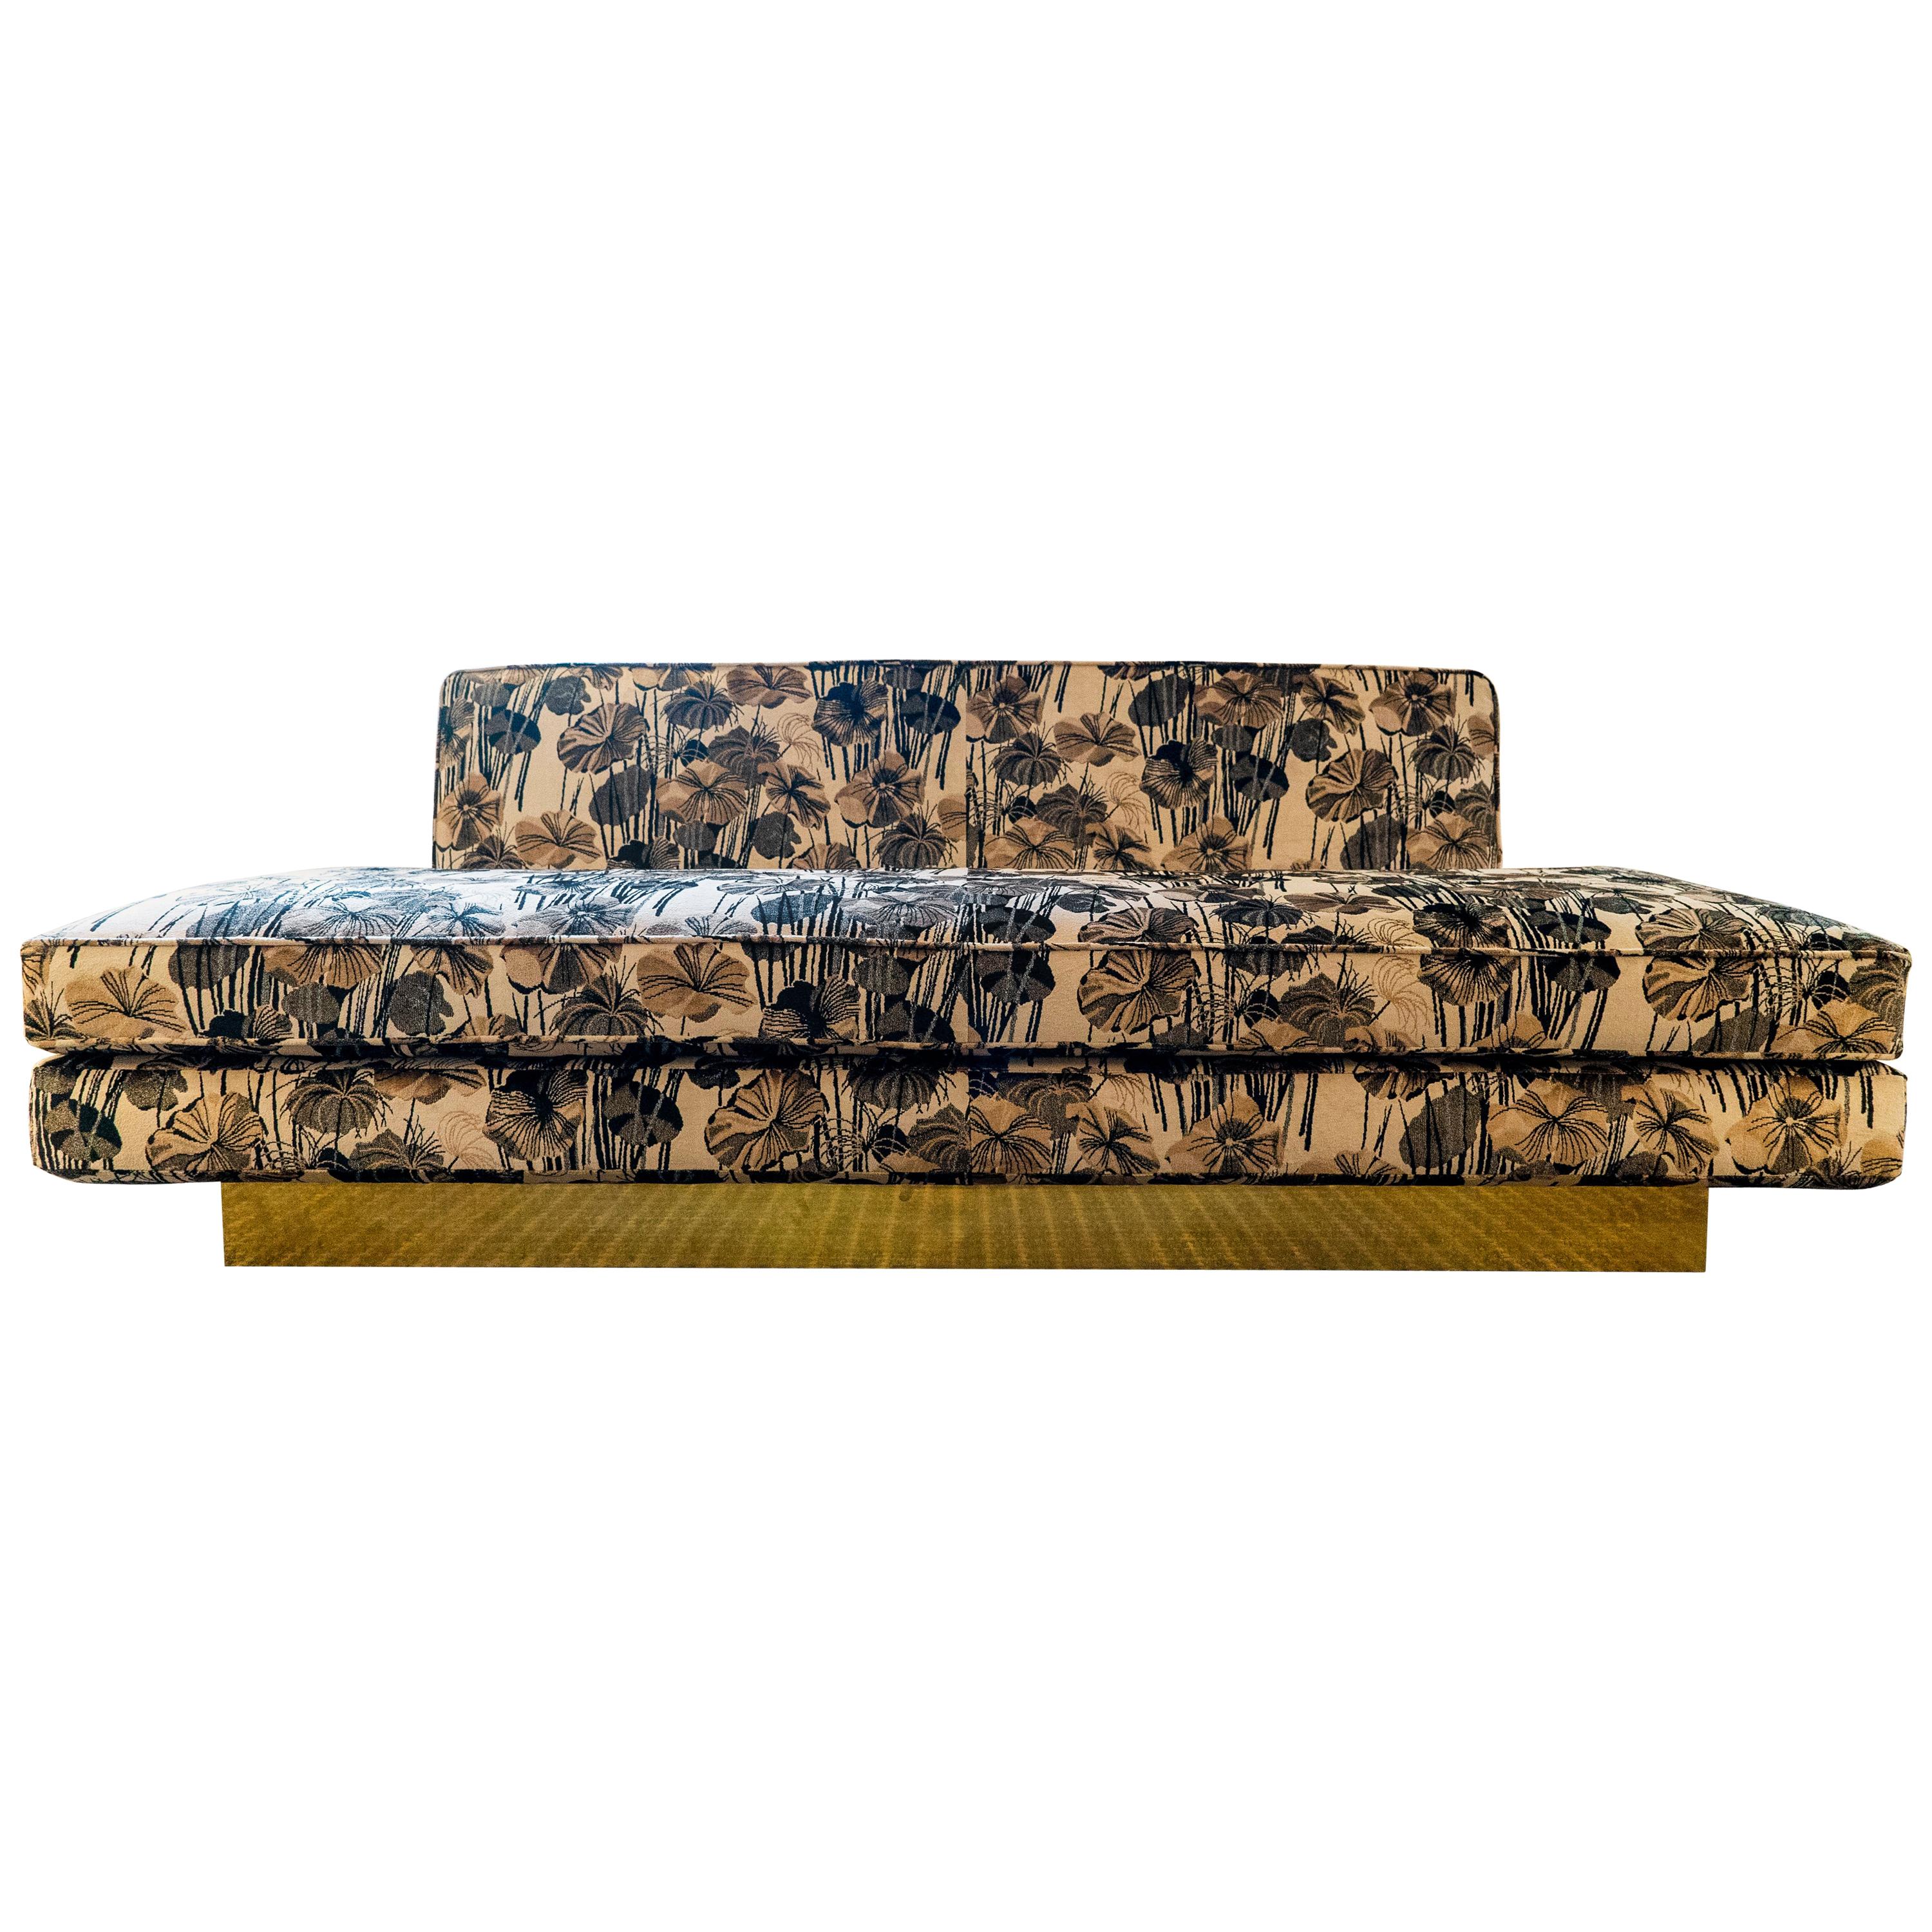 1970s Italian Sofa with Natural Brass Base, 1960s Jacquard Floral Velvet Fabric